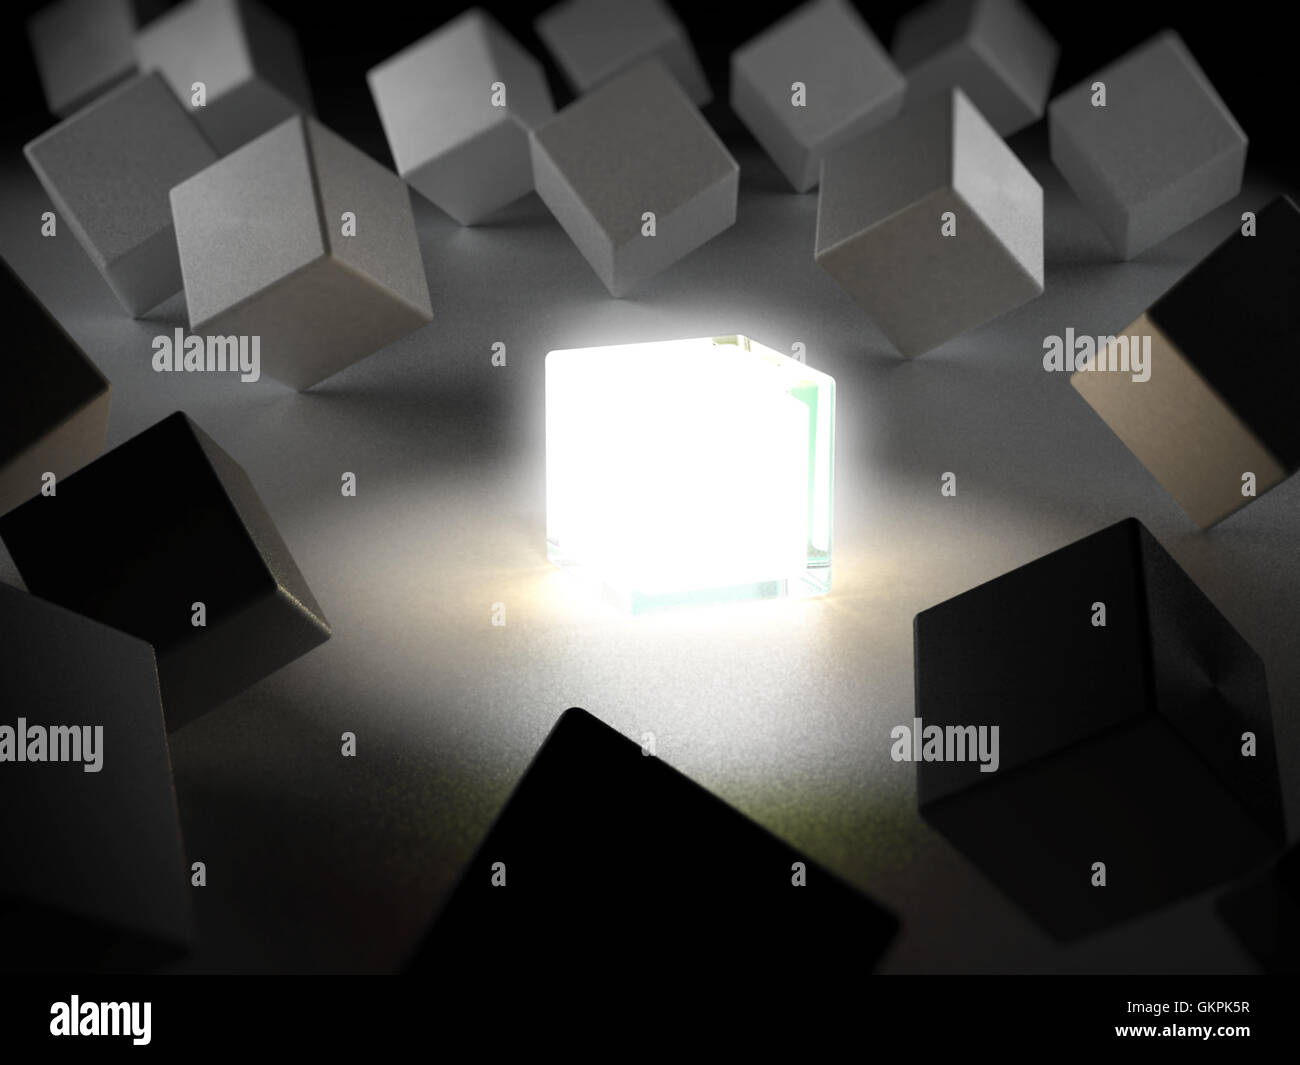 Box emitting light standing out among boxes. 3D illustration. Stock Photo